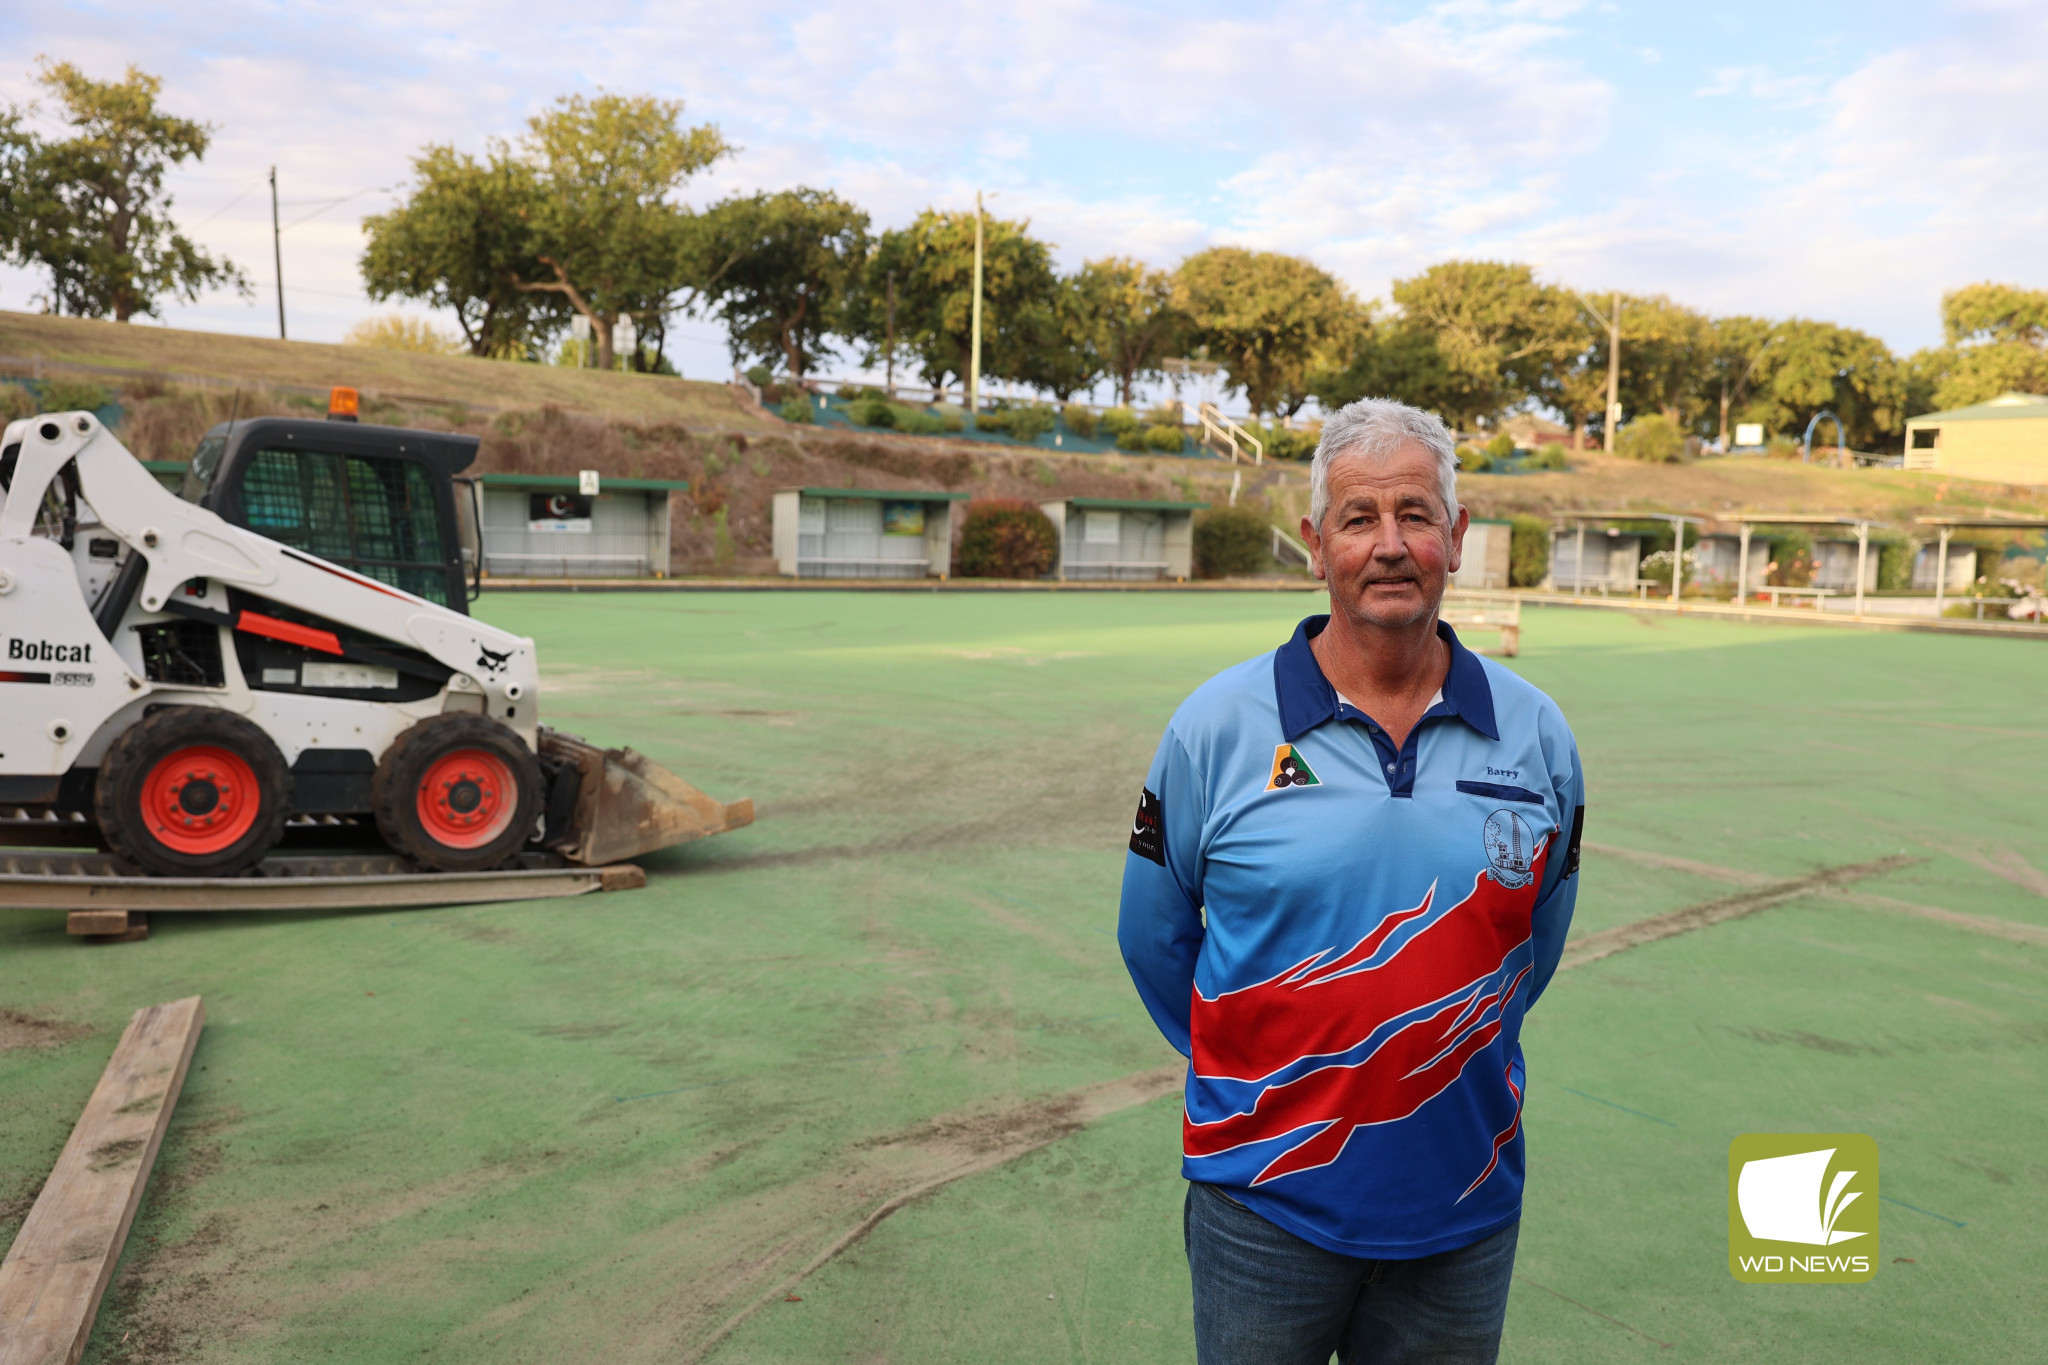 Terang Bowling Club president Barry Stonehouse was excited to see work start on the new surfaces earlier this week.